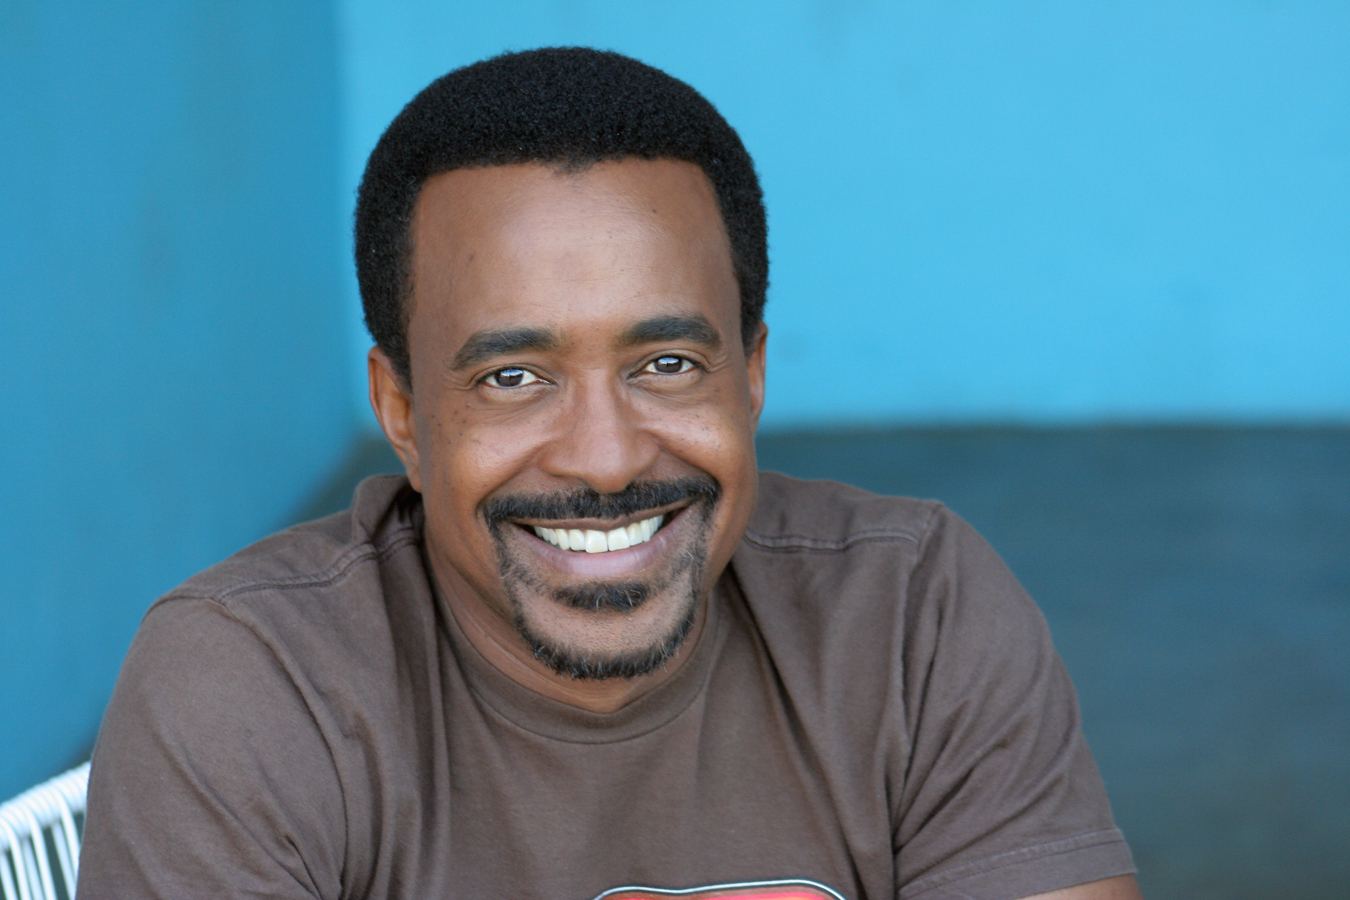 SNL alum Tim Meadows will be at Chicago Improv Festival 2014 as a special guest performing with ASSSSCat on April 6.